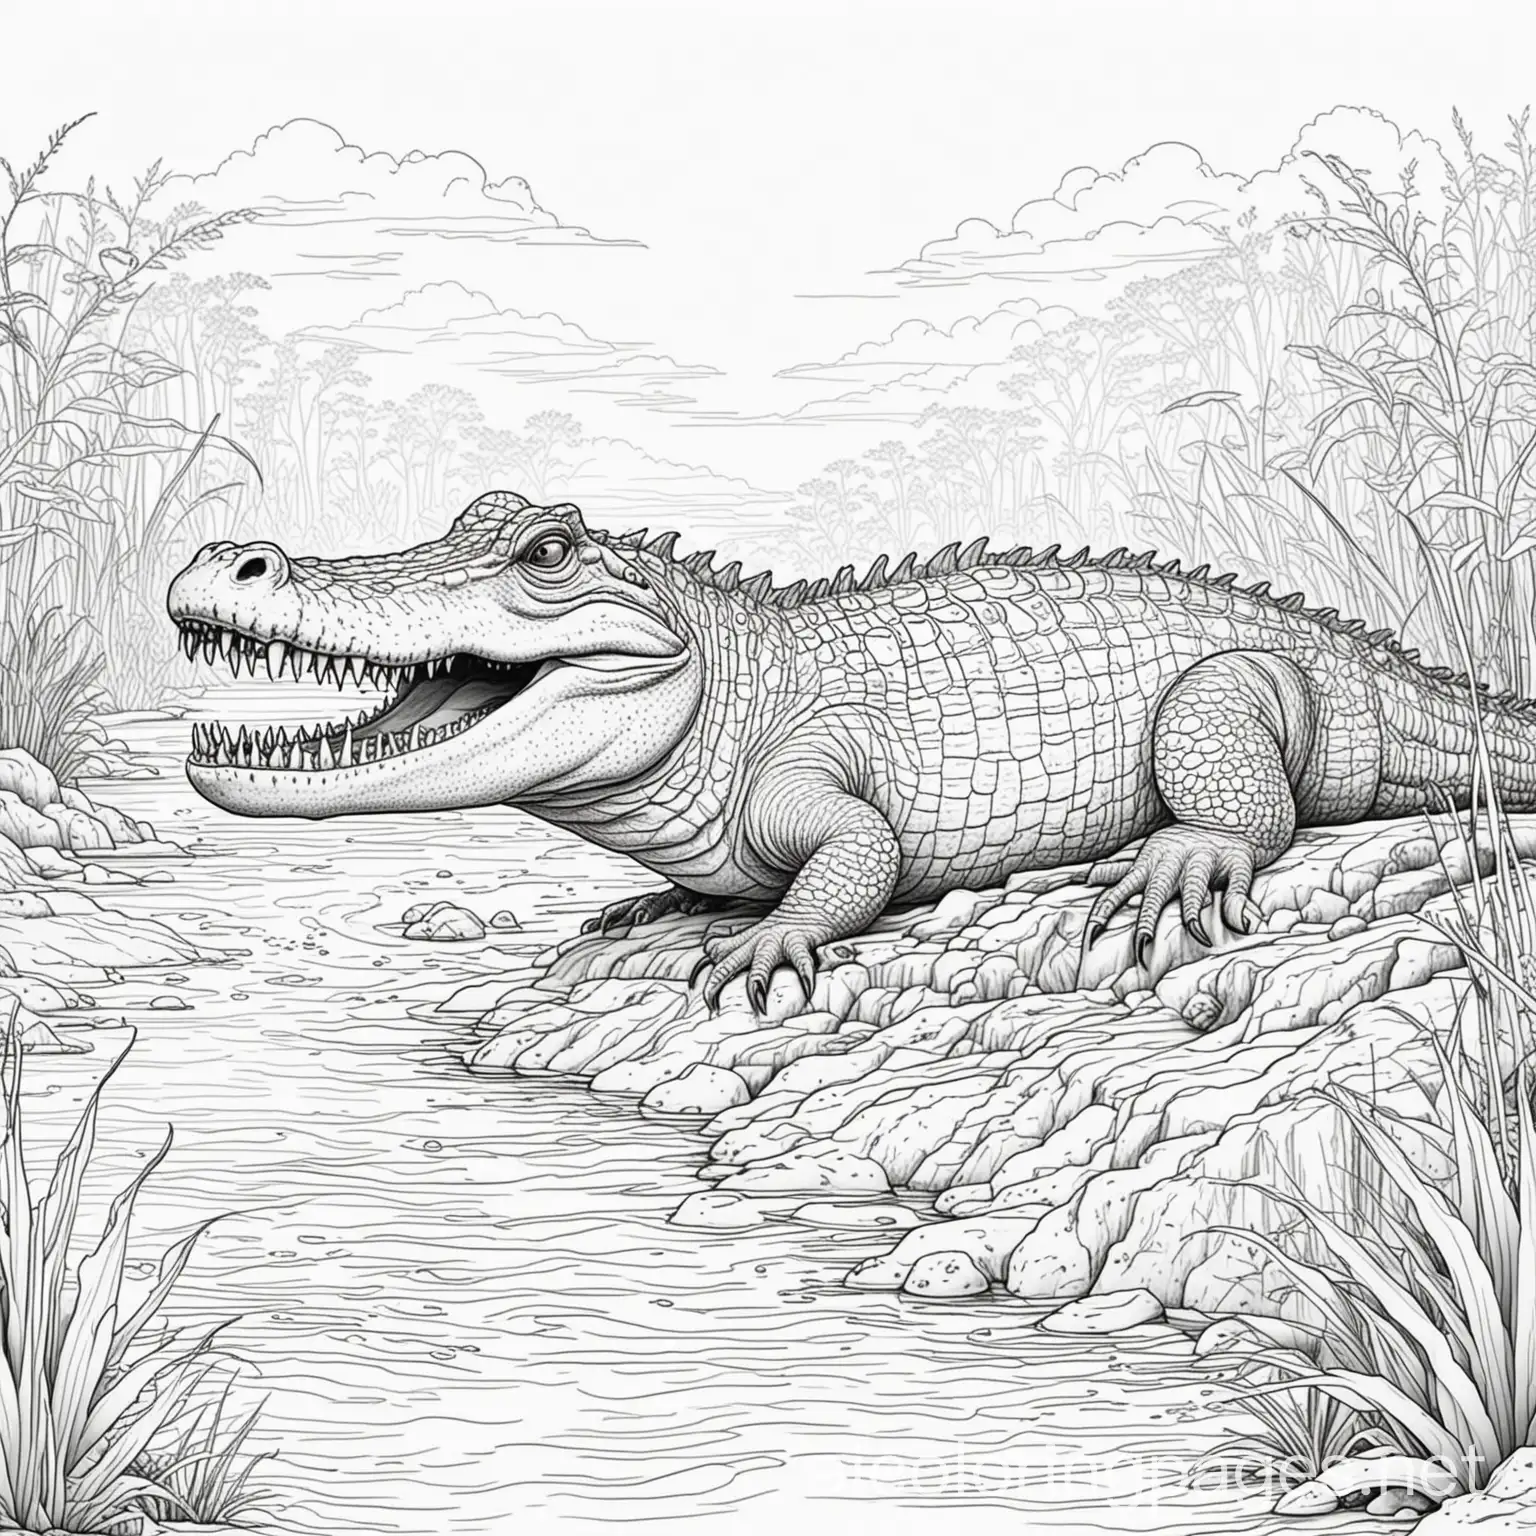 crocodile picture in savana in river not scary for coloring book children 5 and above, Coloring Page, black and white, line art, white background, Simplicity, Ample White Space